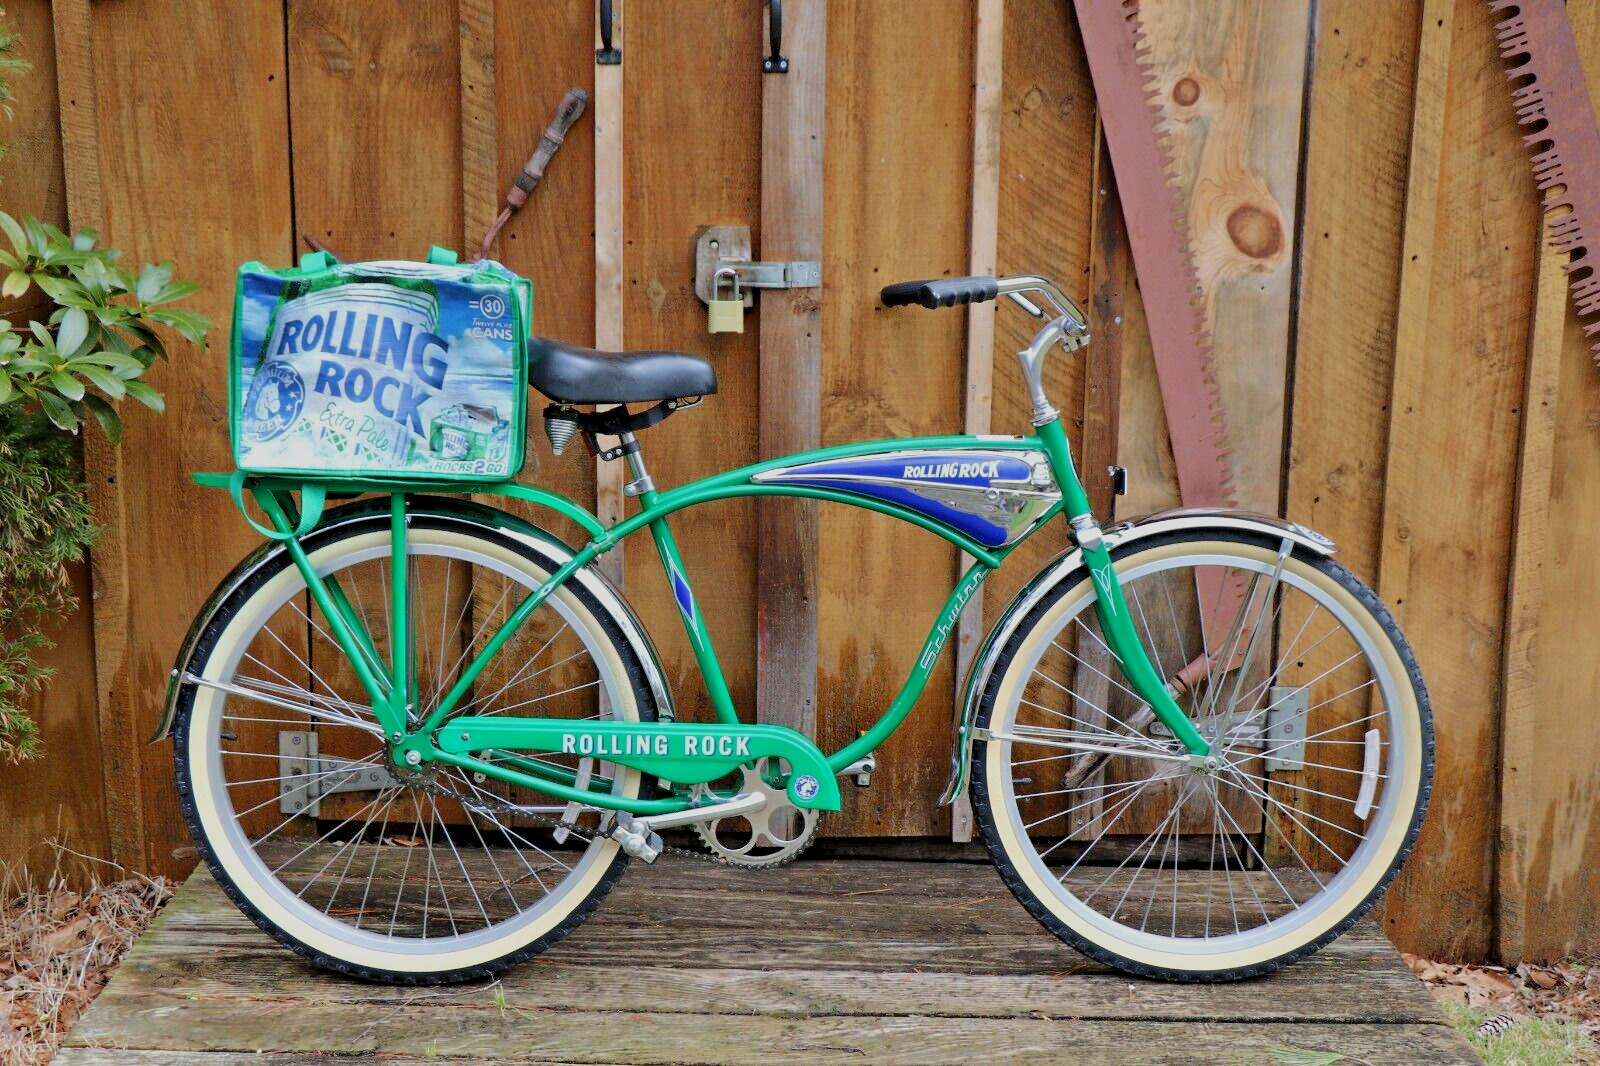 Schwinn Limited edition Rolling Rock bicycle (extremely limited miles Very nice)